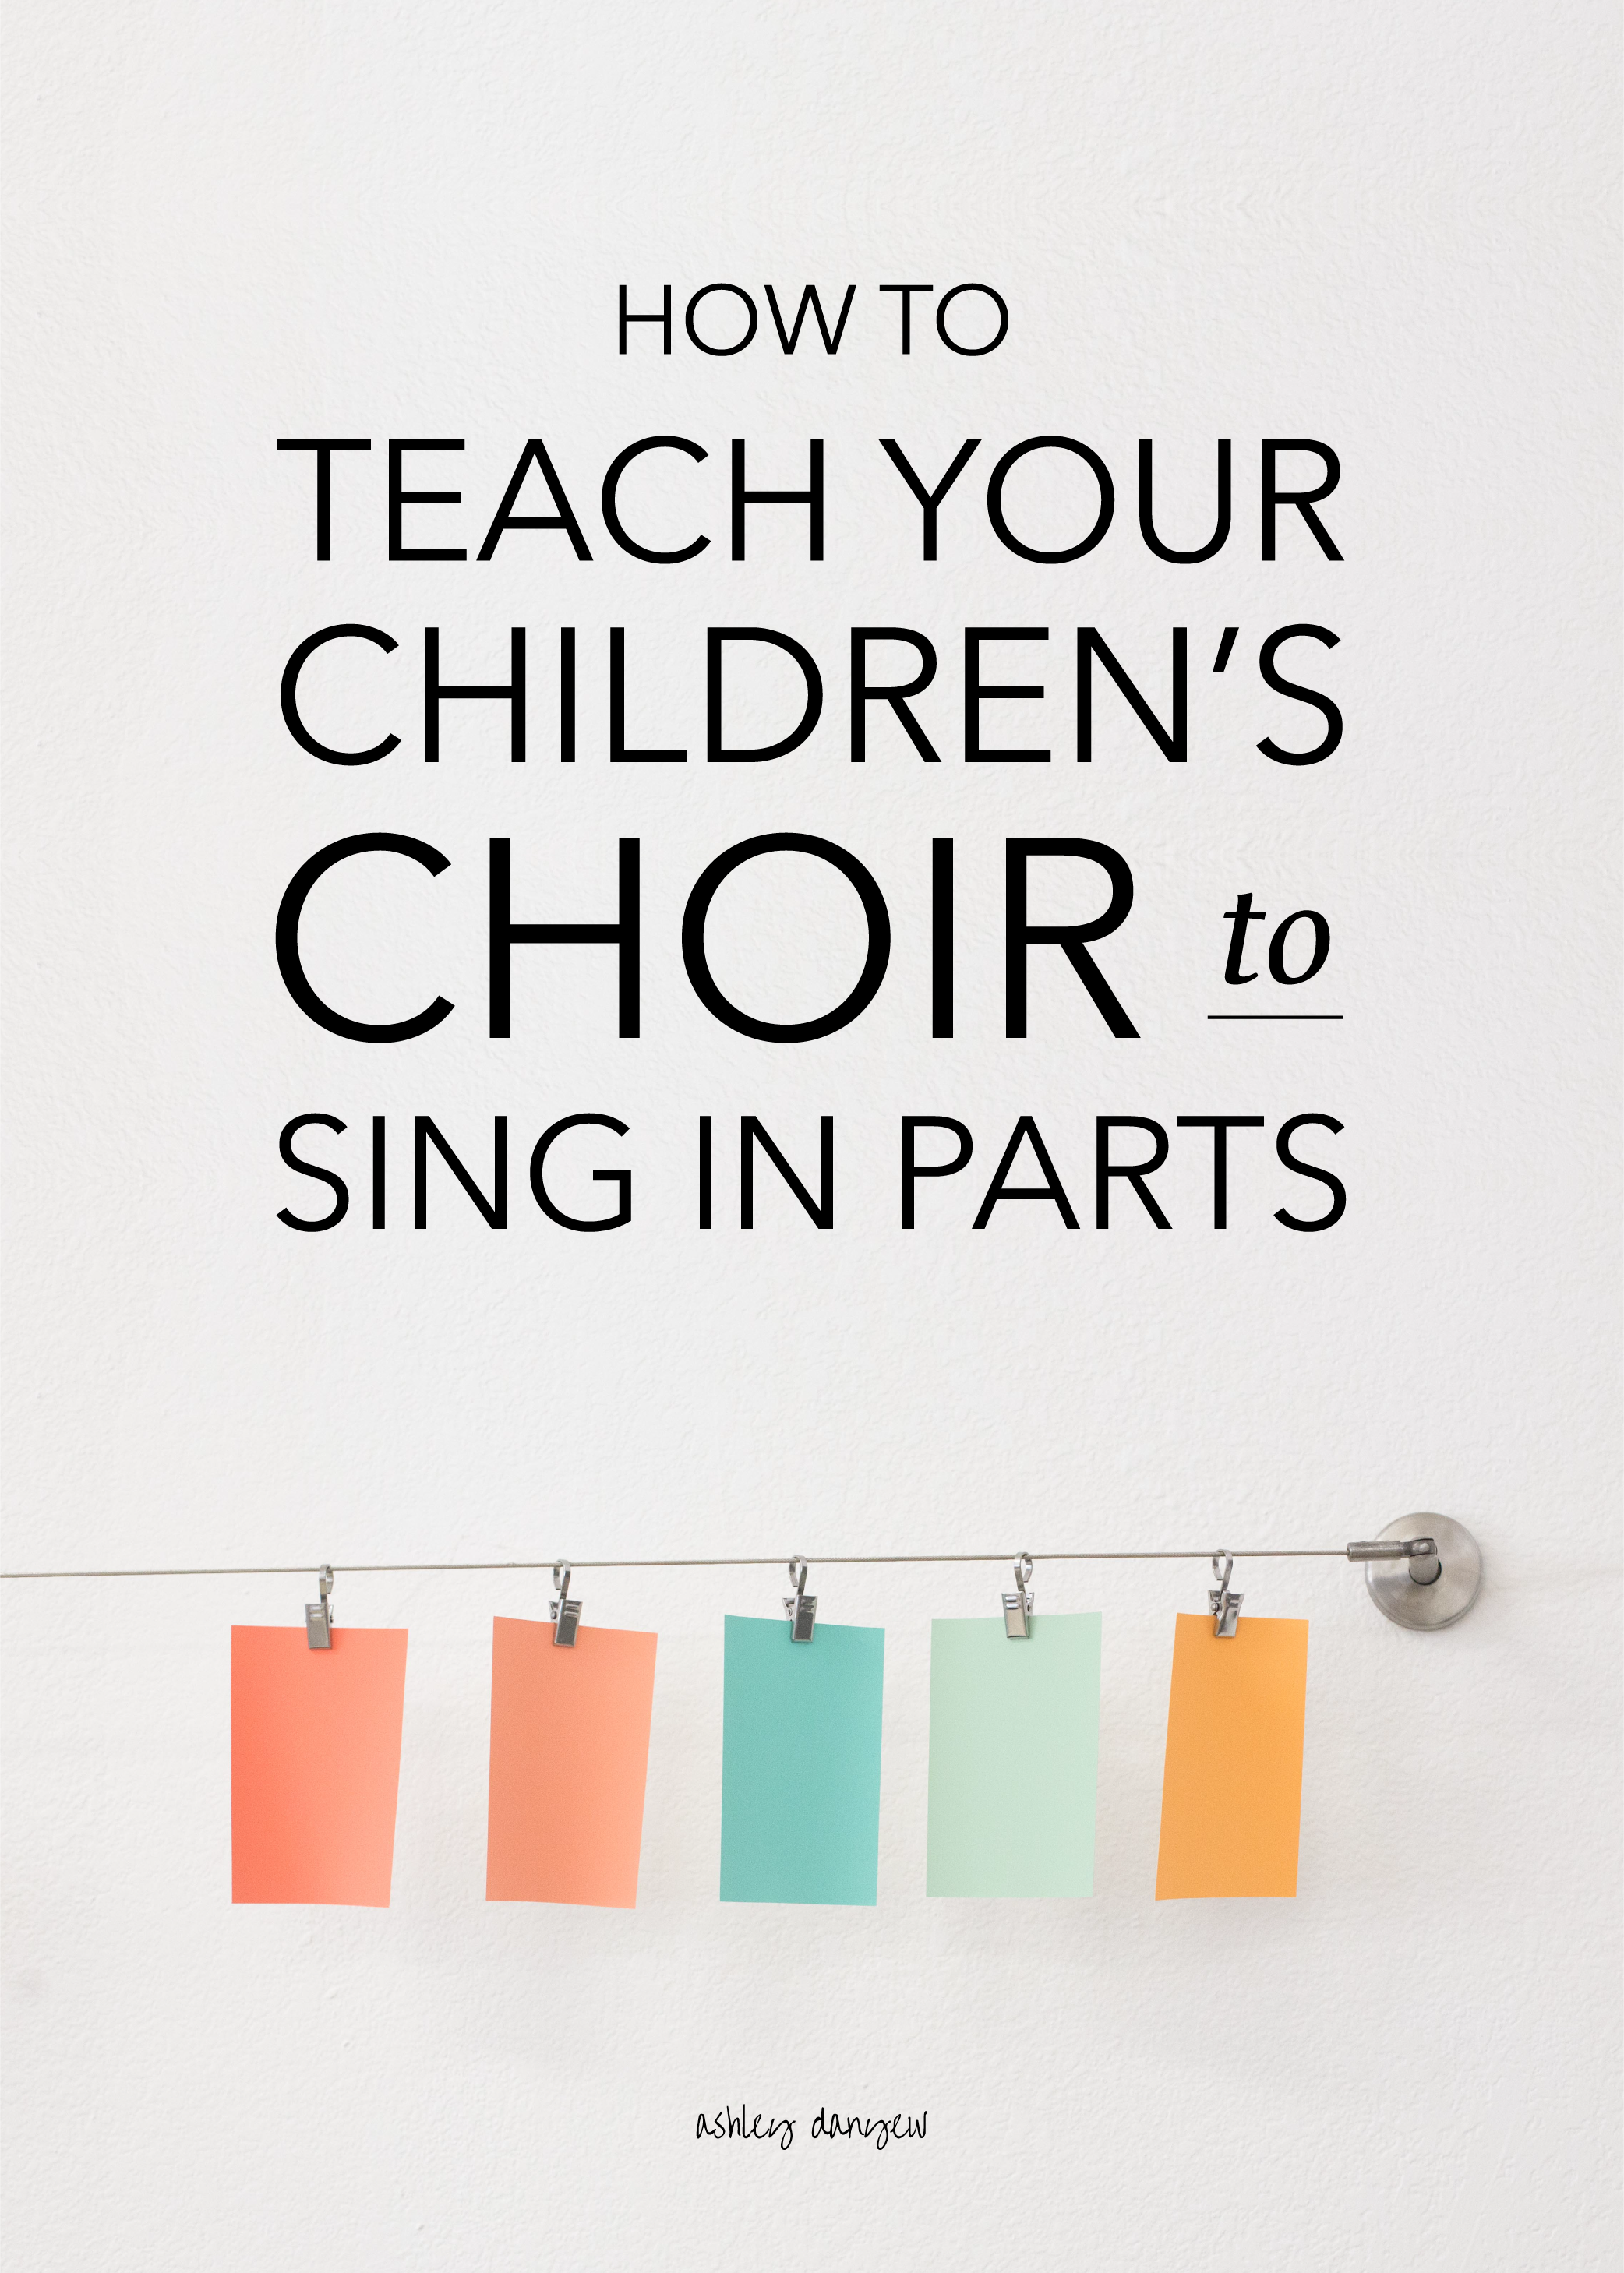 How to Teach Your Children's Choir to Sing in Parts